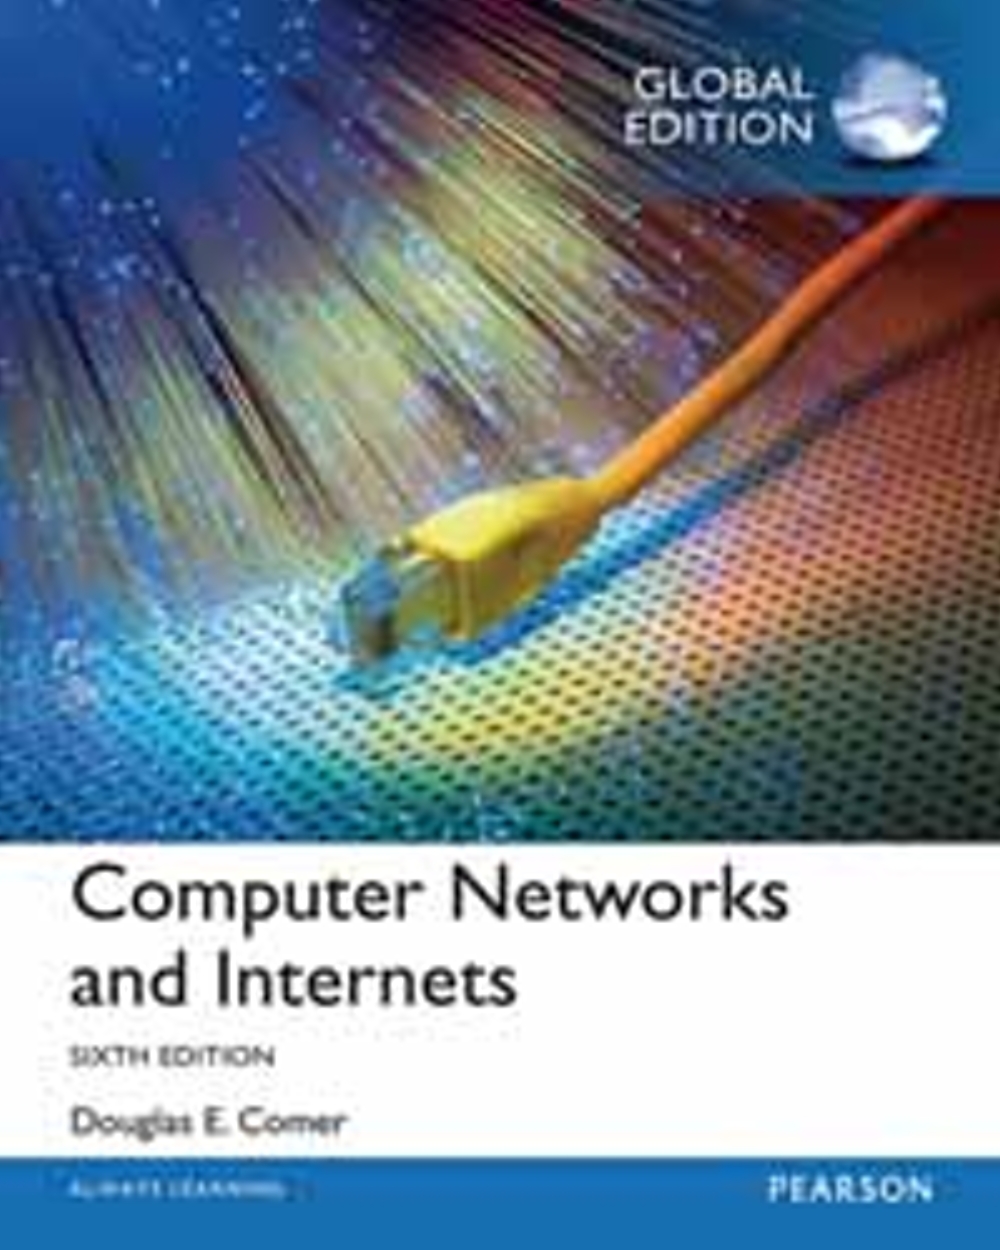 COMPUTER NETWORKS AND INTERNET...